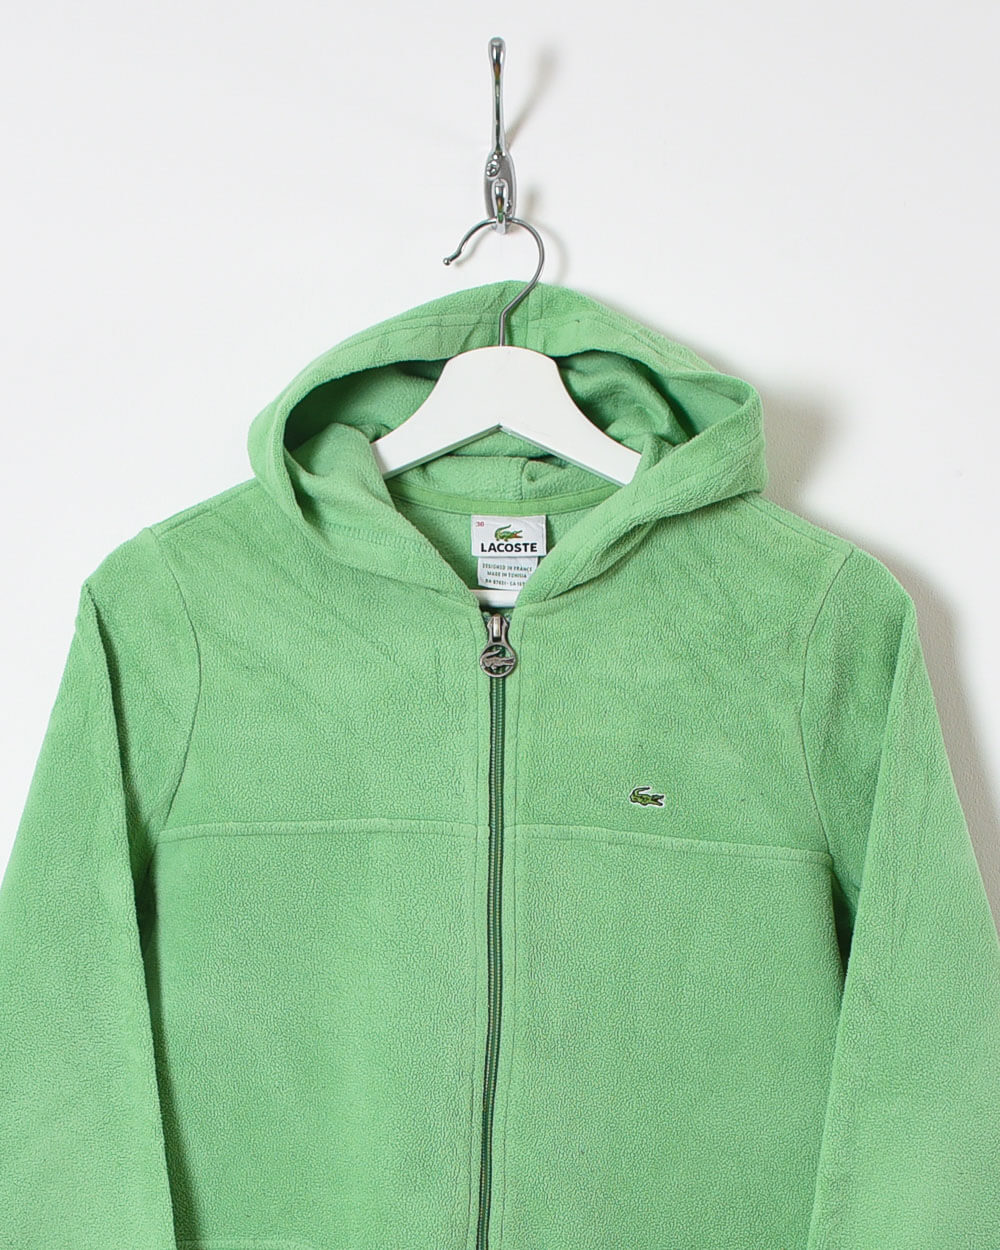 Lacoste Women's Fleece Hoodie - Small - Domno Vintage 90s, 80s, 00s Retro and Vintage Clothing 